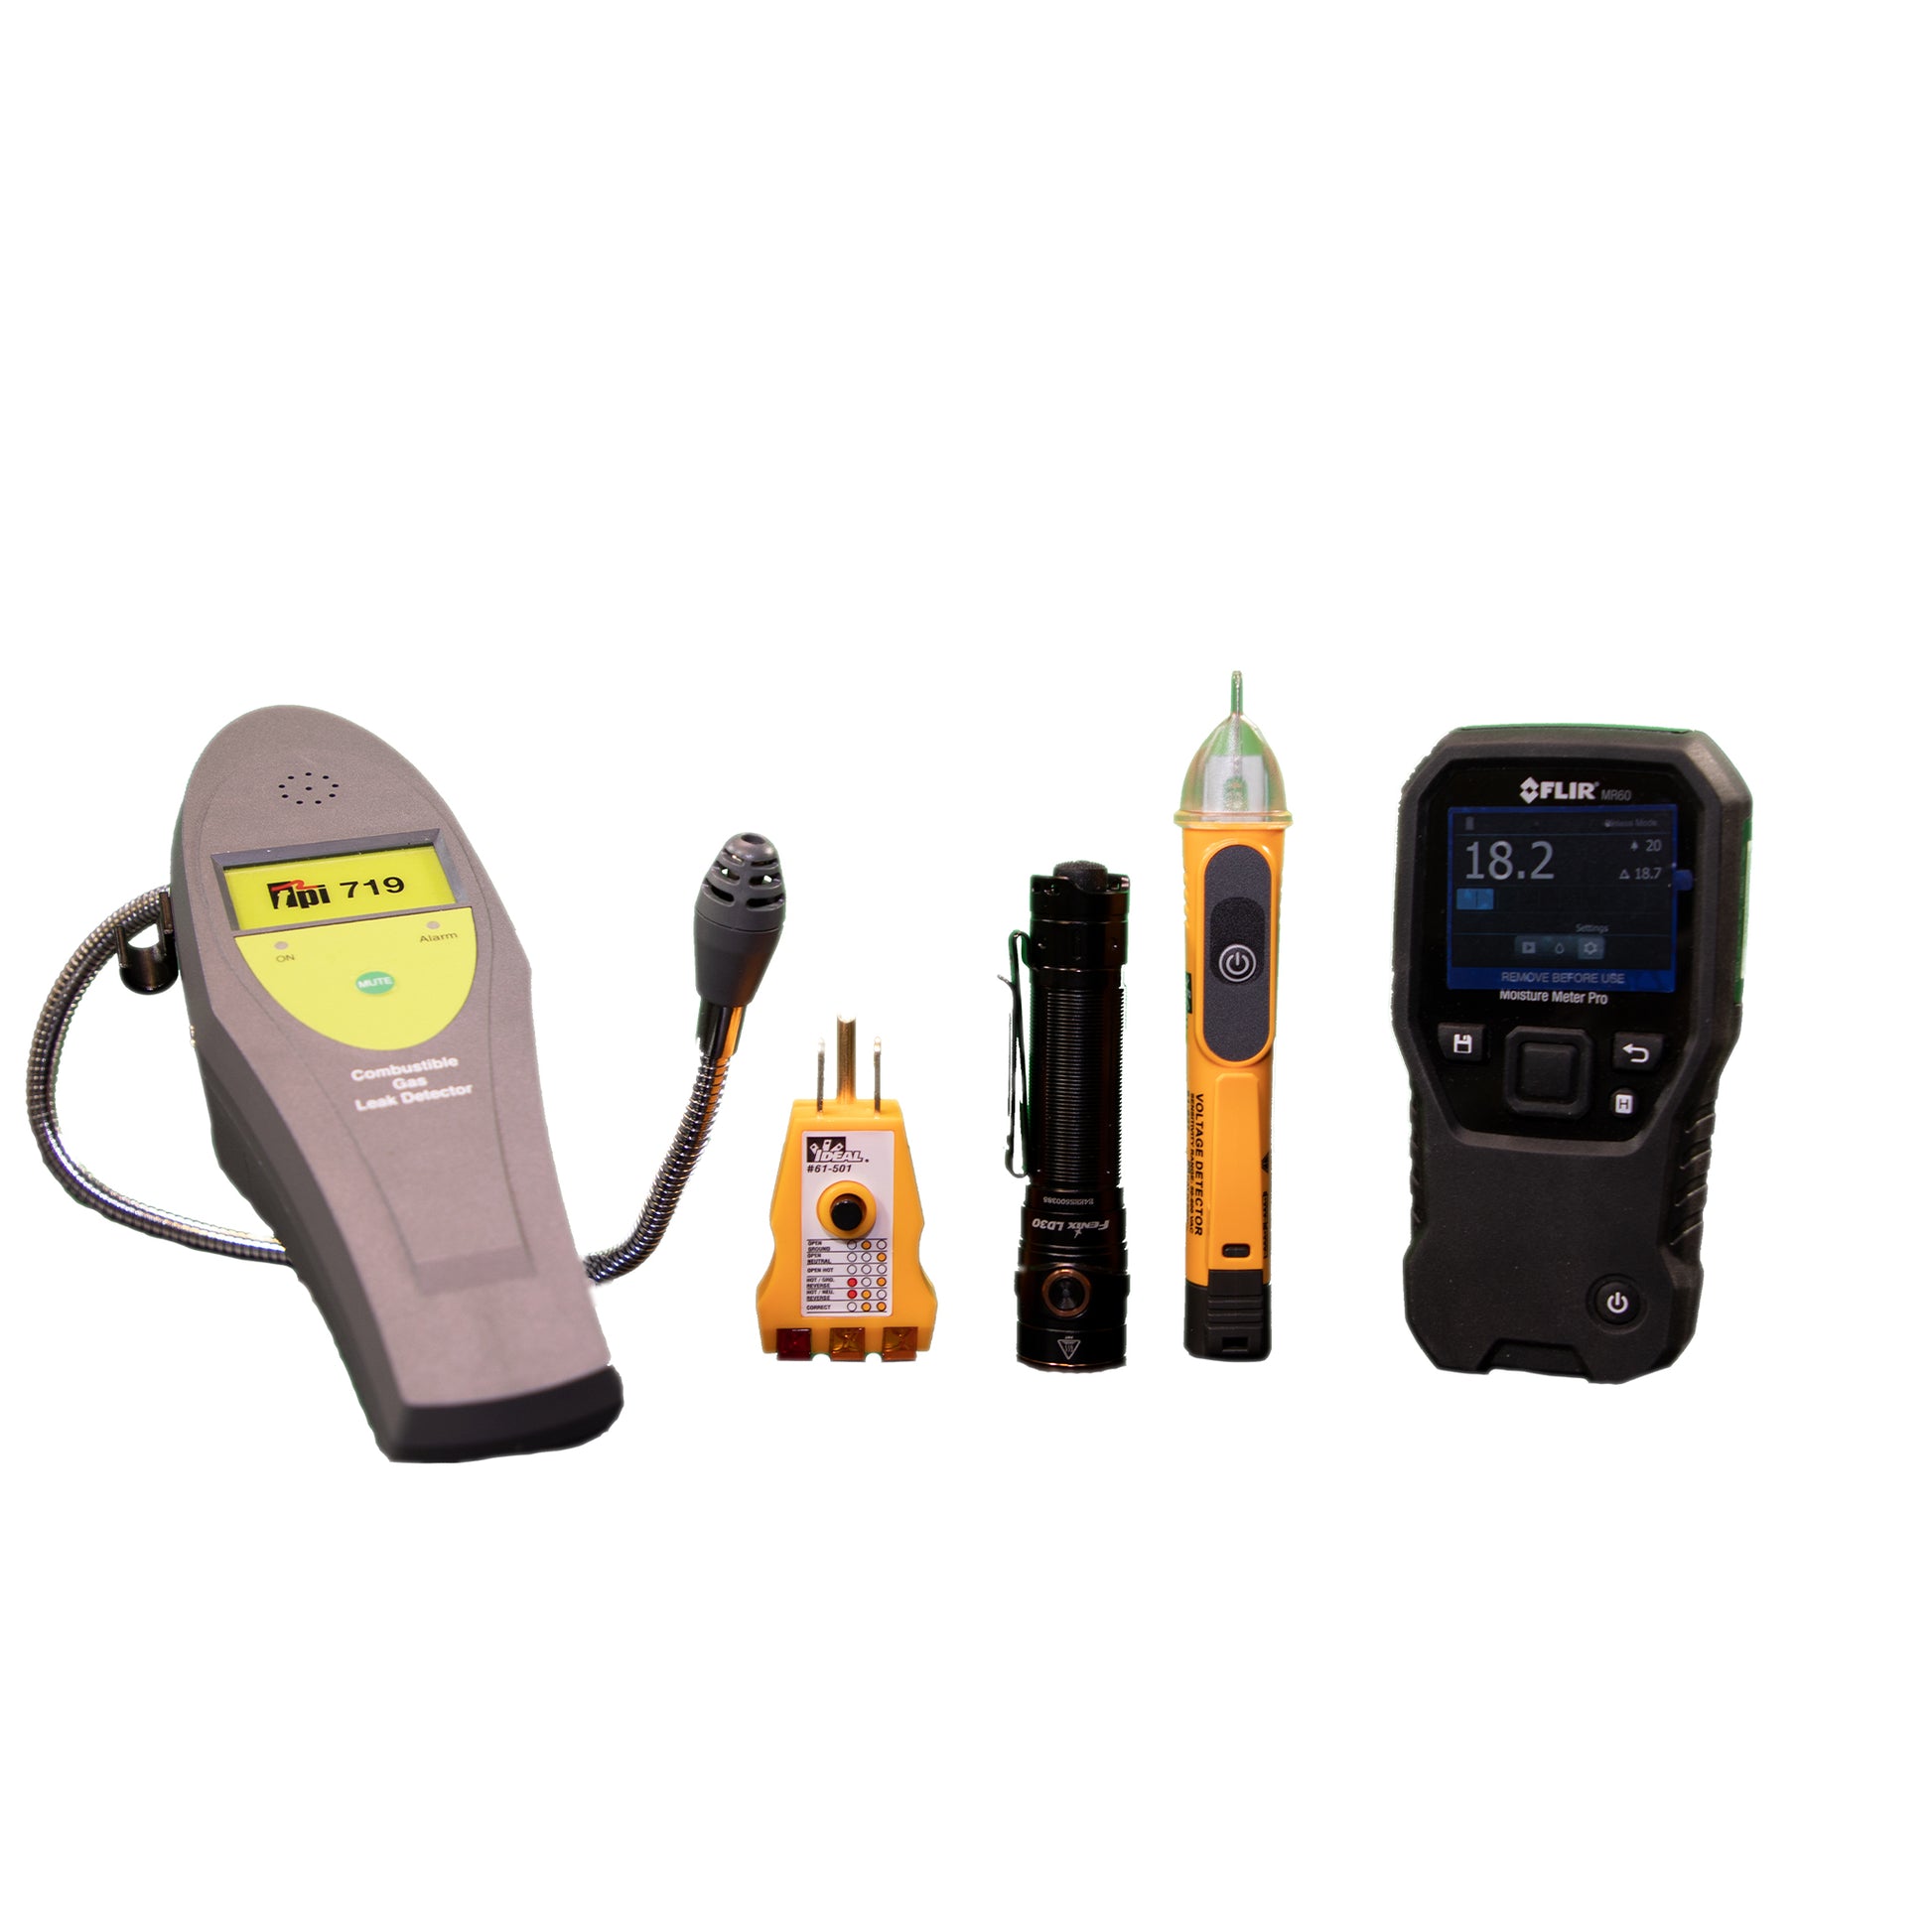 Home Inspection Tool Kit - Deluxe